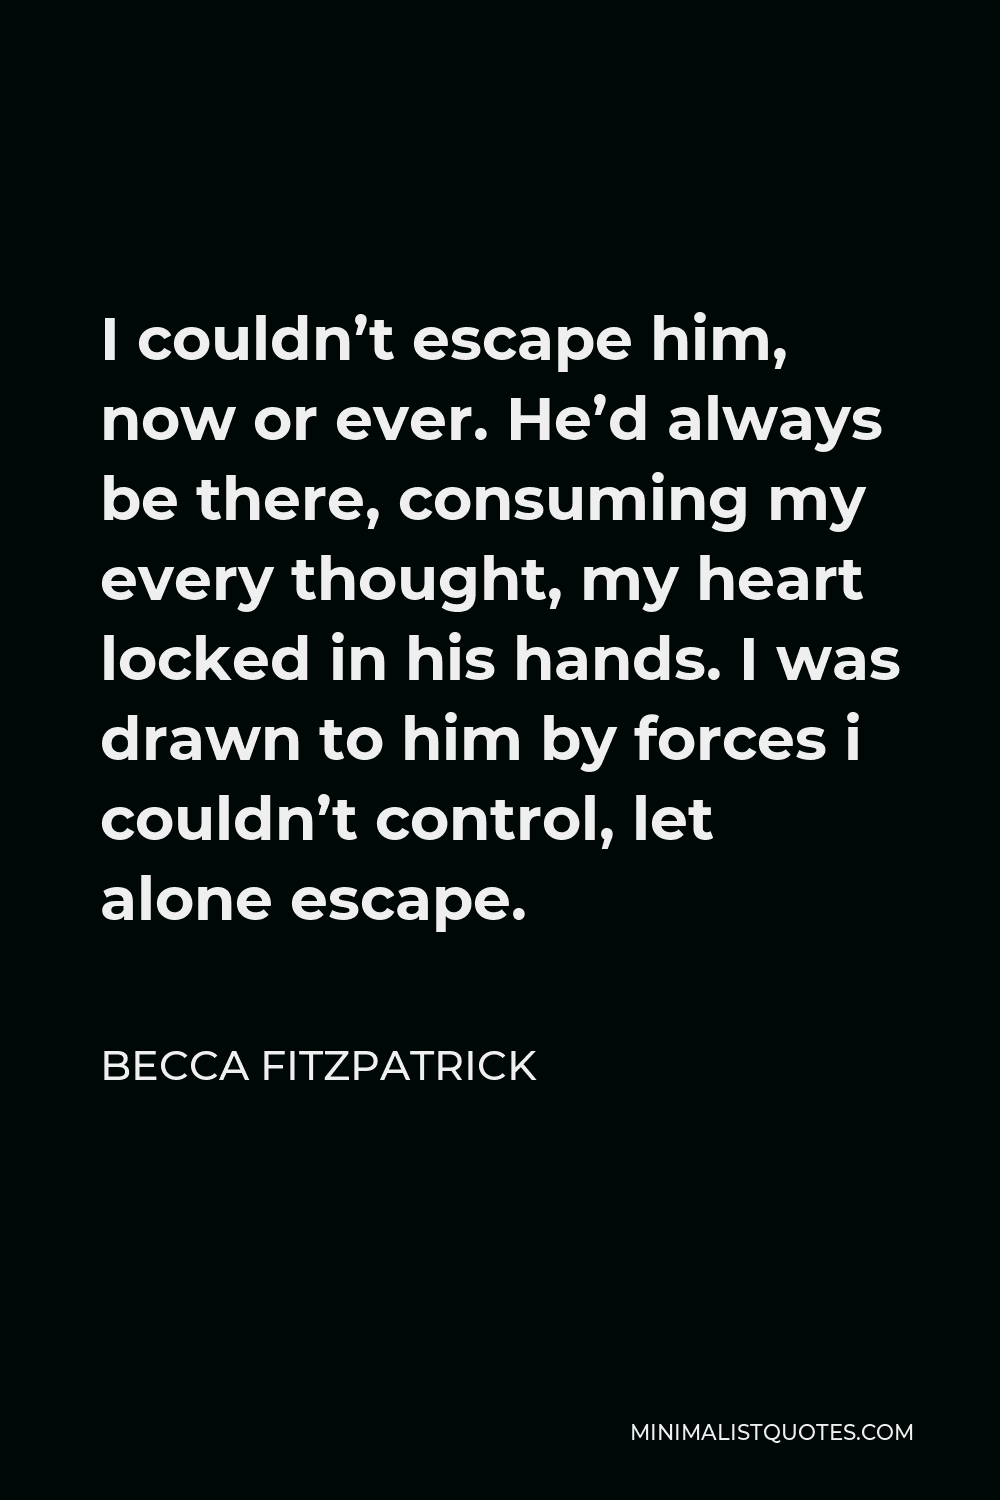 Becca Fitzpatrick Quote - I couldn’t escape him, now or ever. He’d always be there, consuming my every thought, my heart locked in his hands. I was drawn to him by forces i couldn’t control, let alone escape.